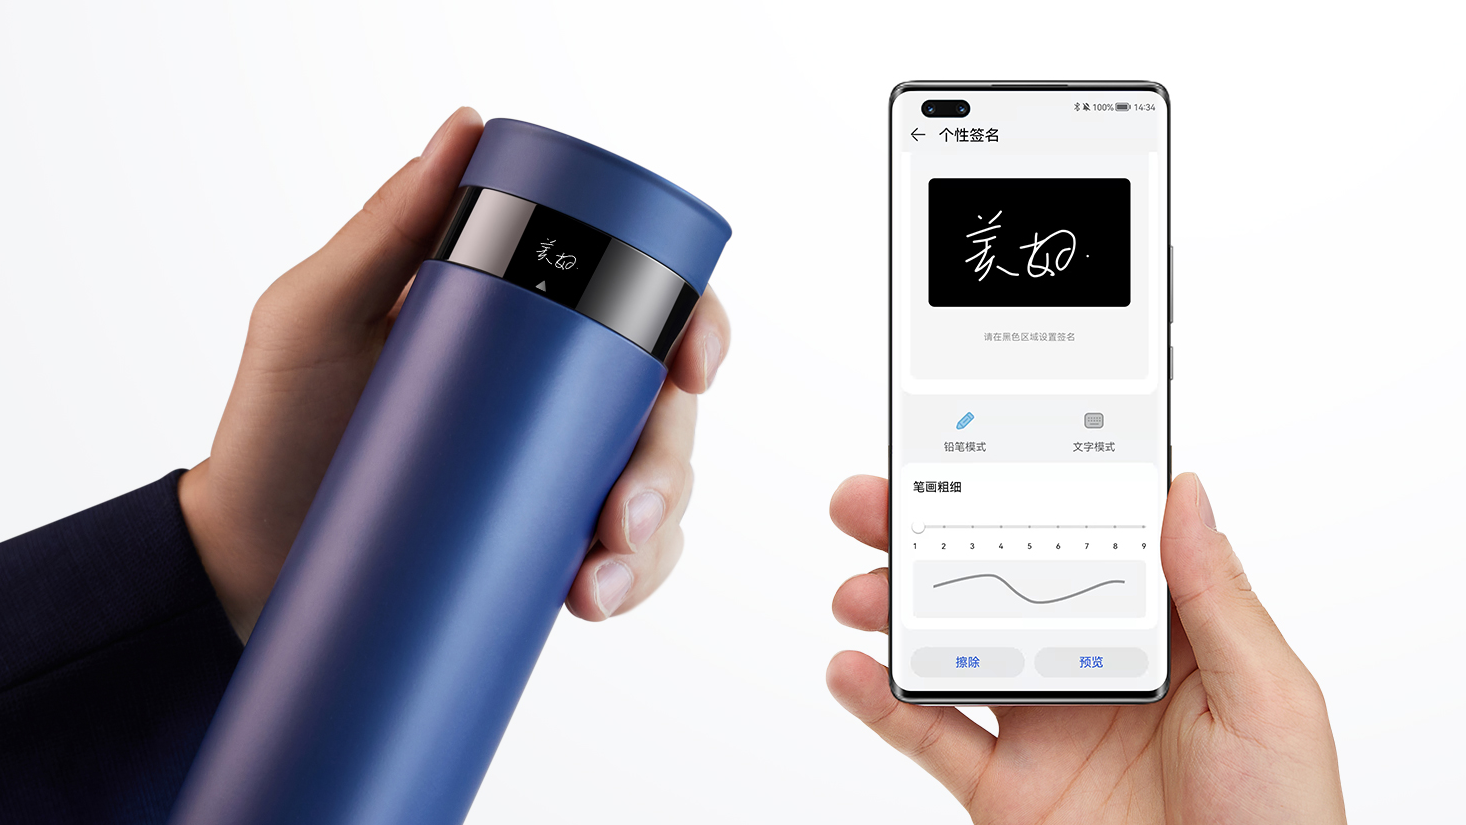 Huawei's smart water bottle runs HarmonyOS and pairs with a smartphone.  (Image: Huawei / Vmall)